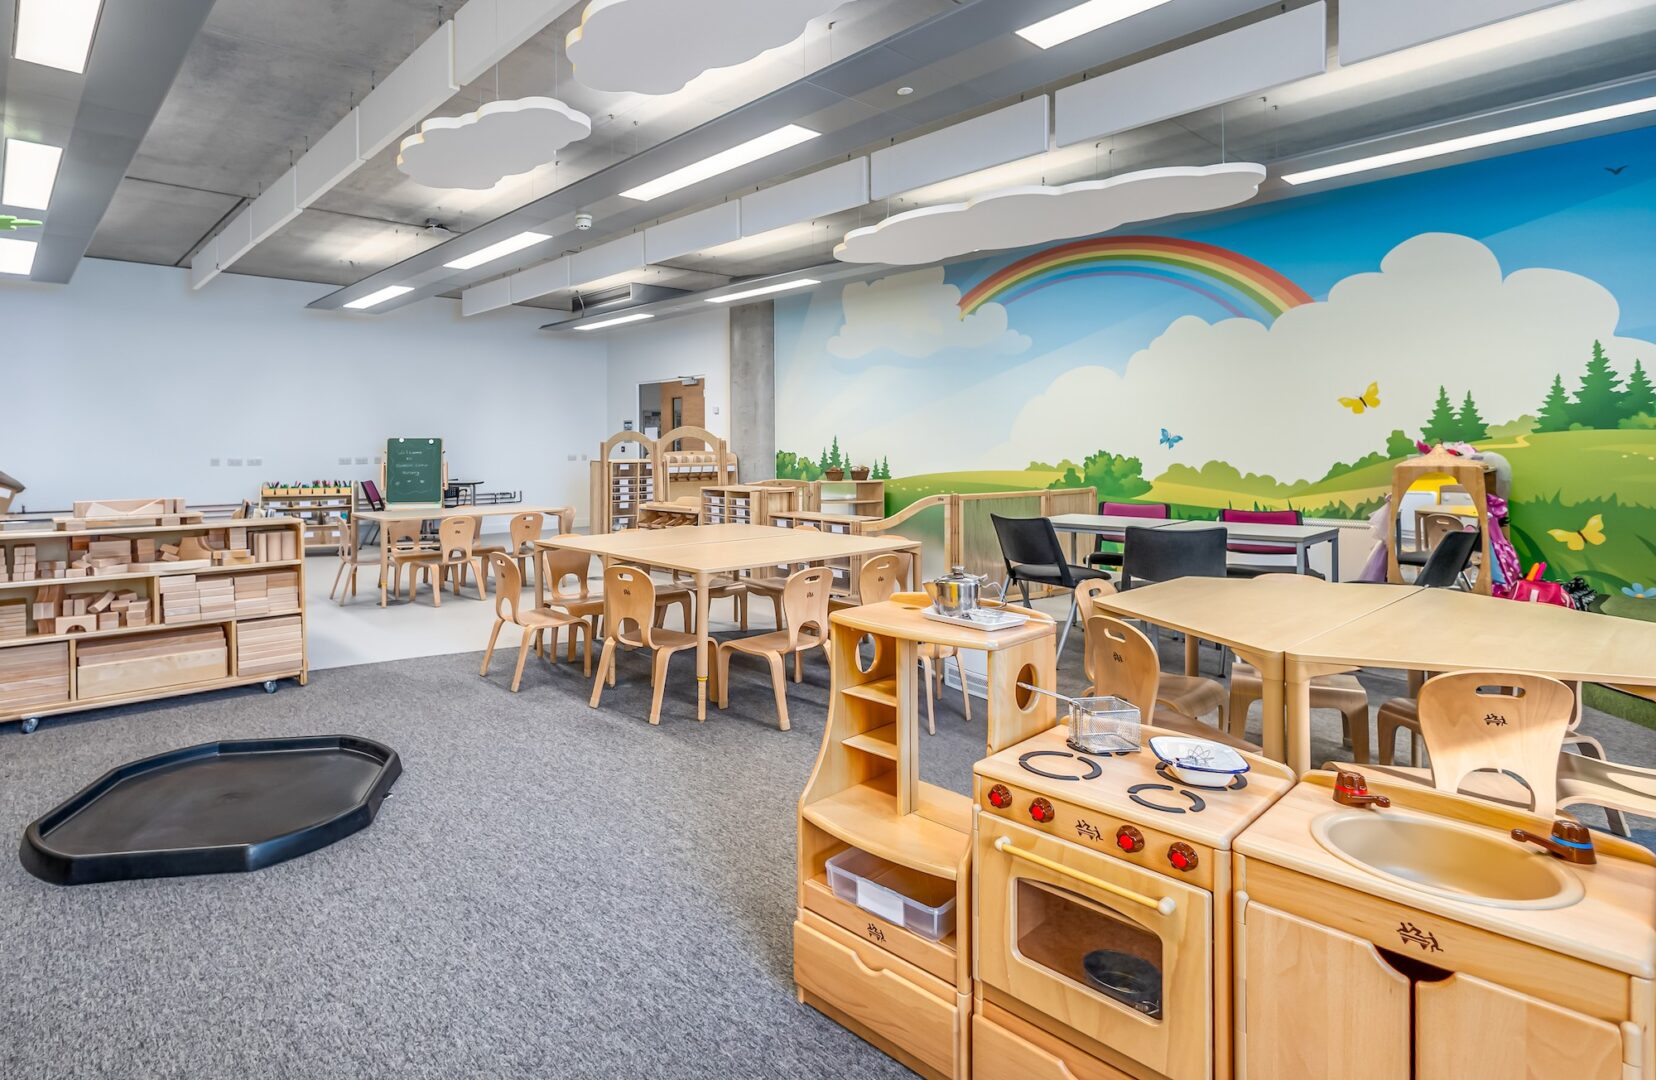 a tlevel early years classroom with bright lights, a colourful wall mural and children's play set